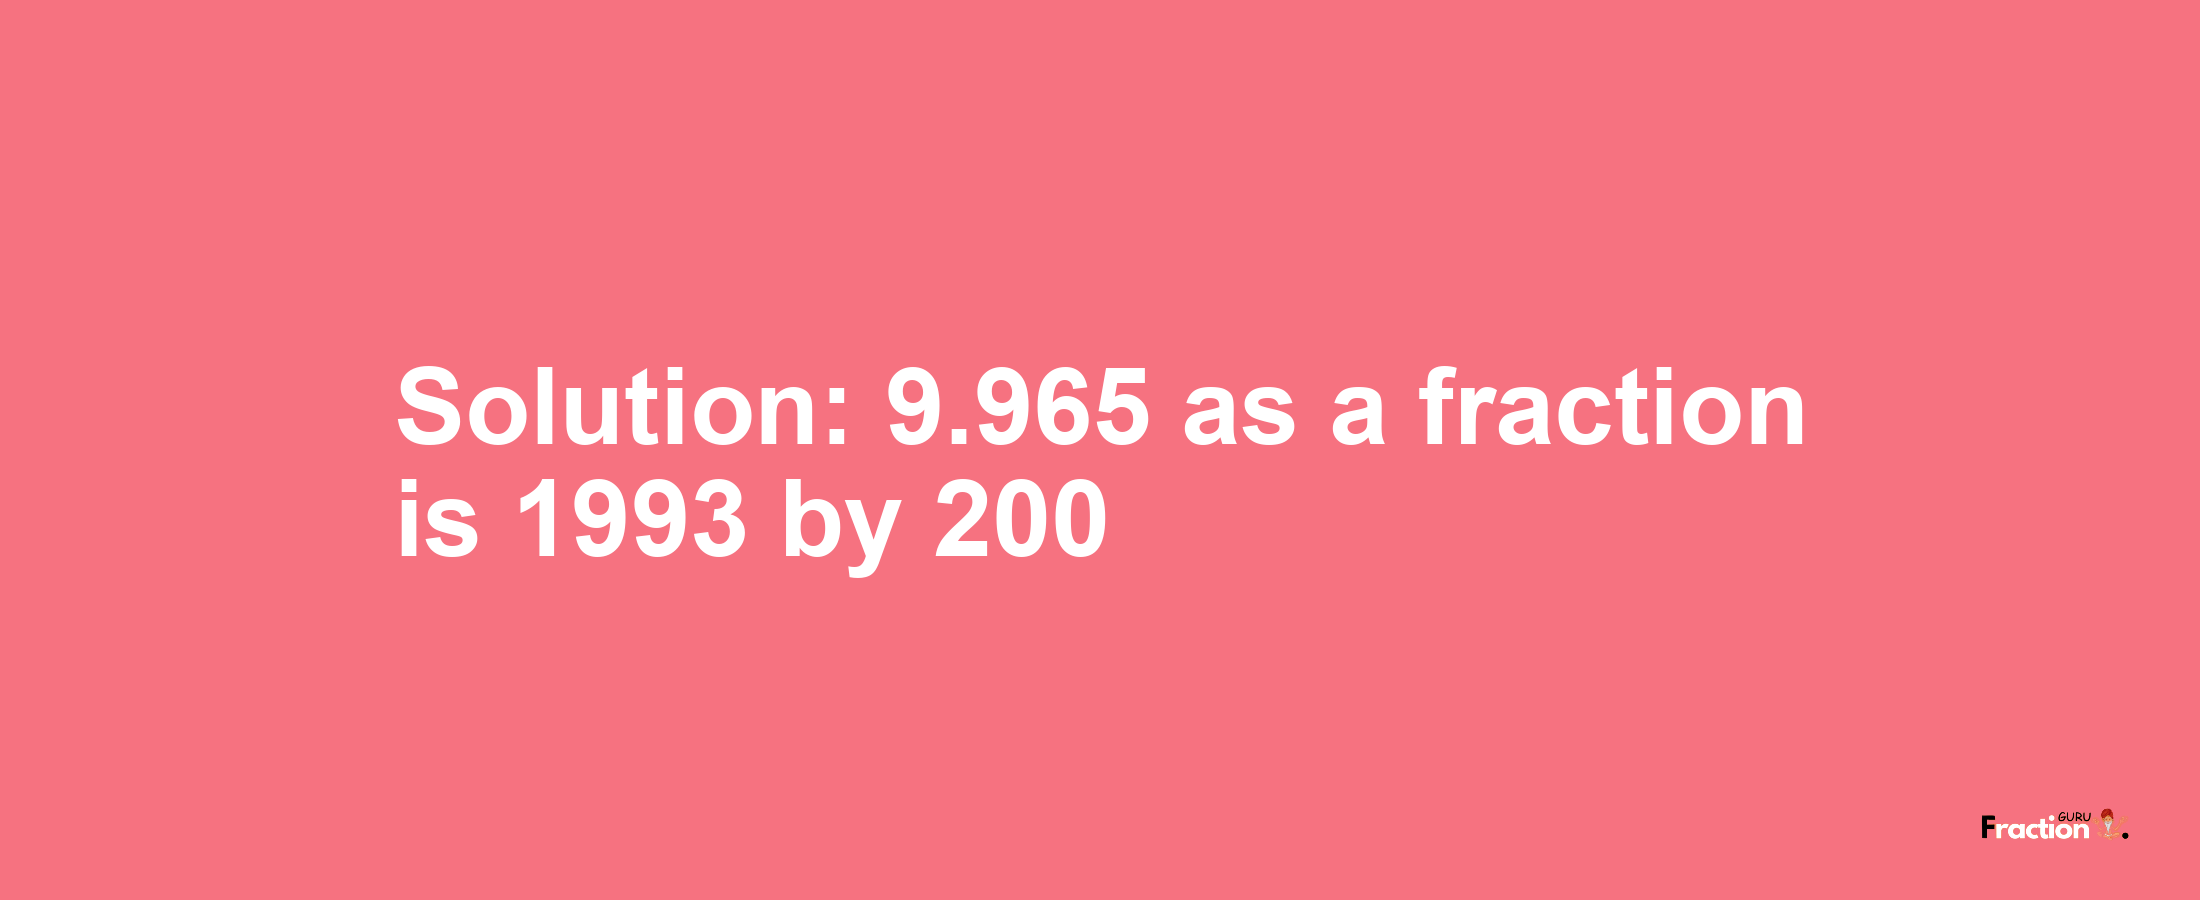 Solution:9.965 as a fraction is 1993/200